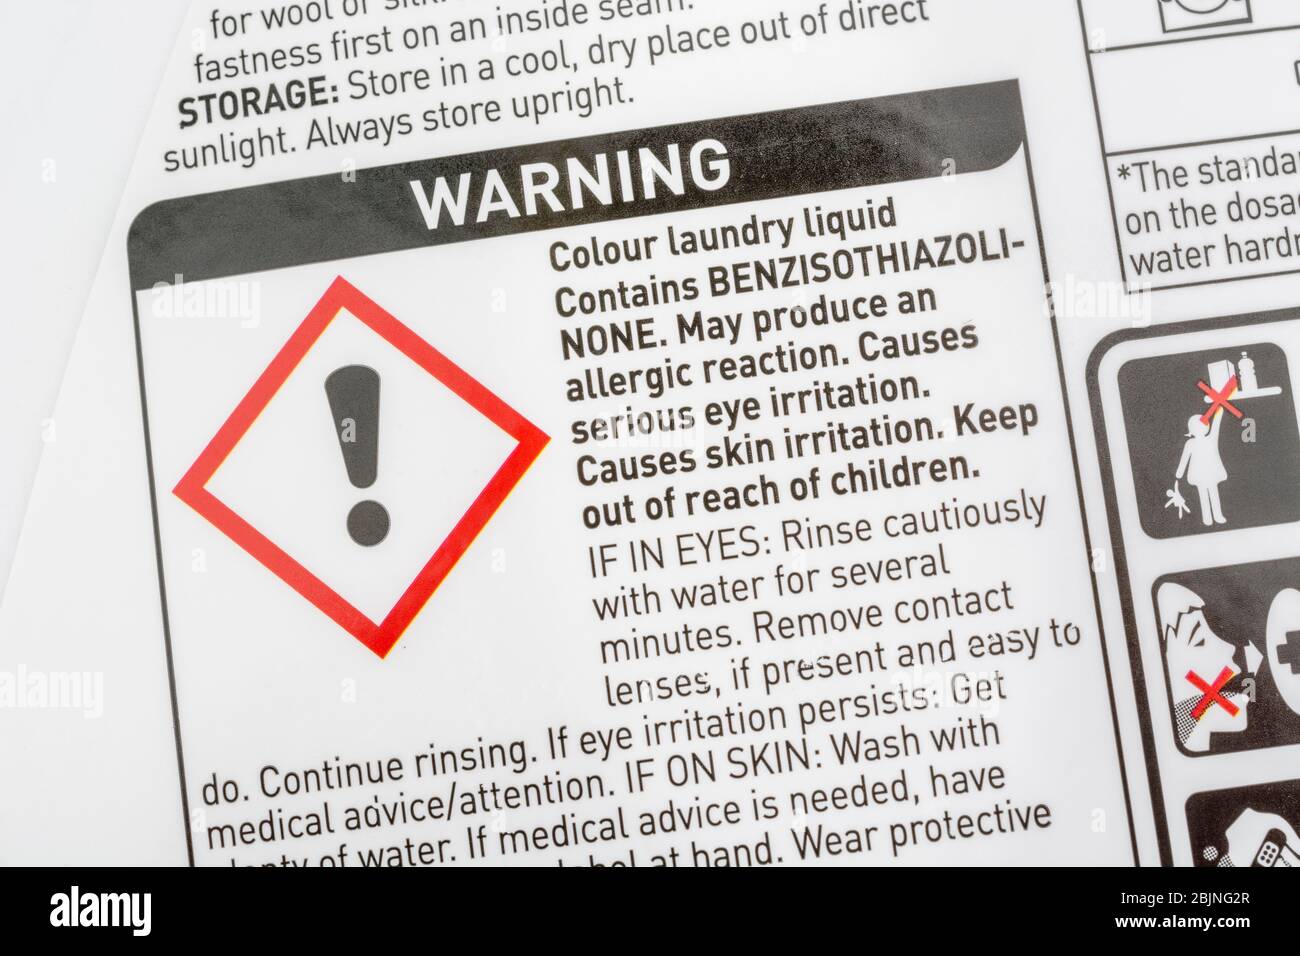 ASDA laundry soap liquid & Exclamation mark hazard symbol for skin, eye or respiratory tract irritant on warning label. Dangerous household products. Stock Photo